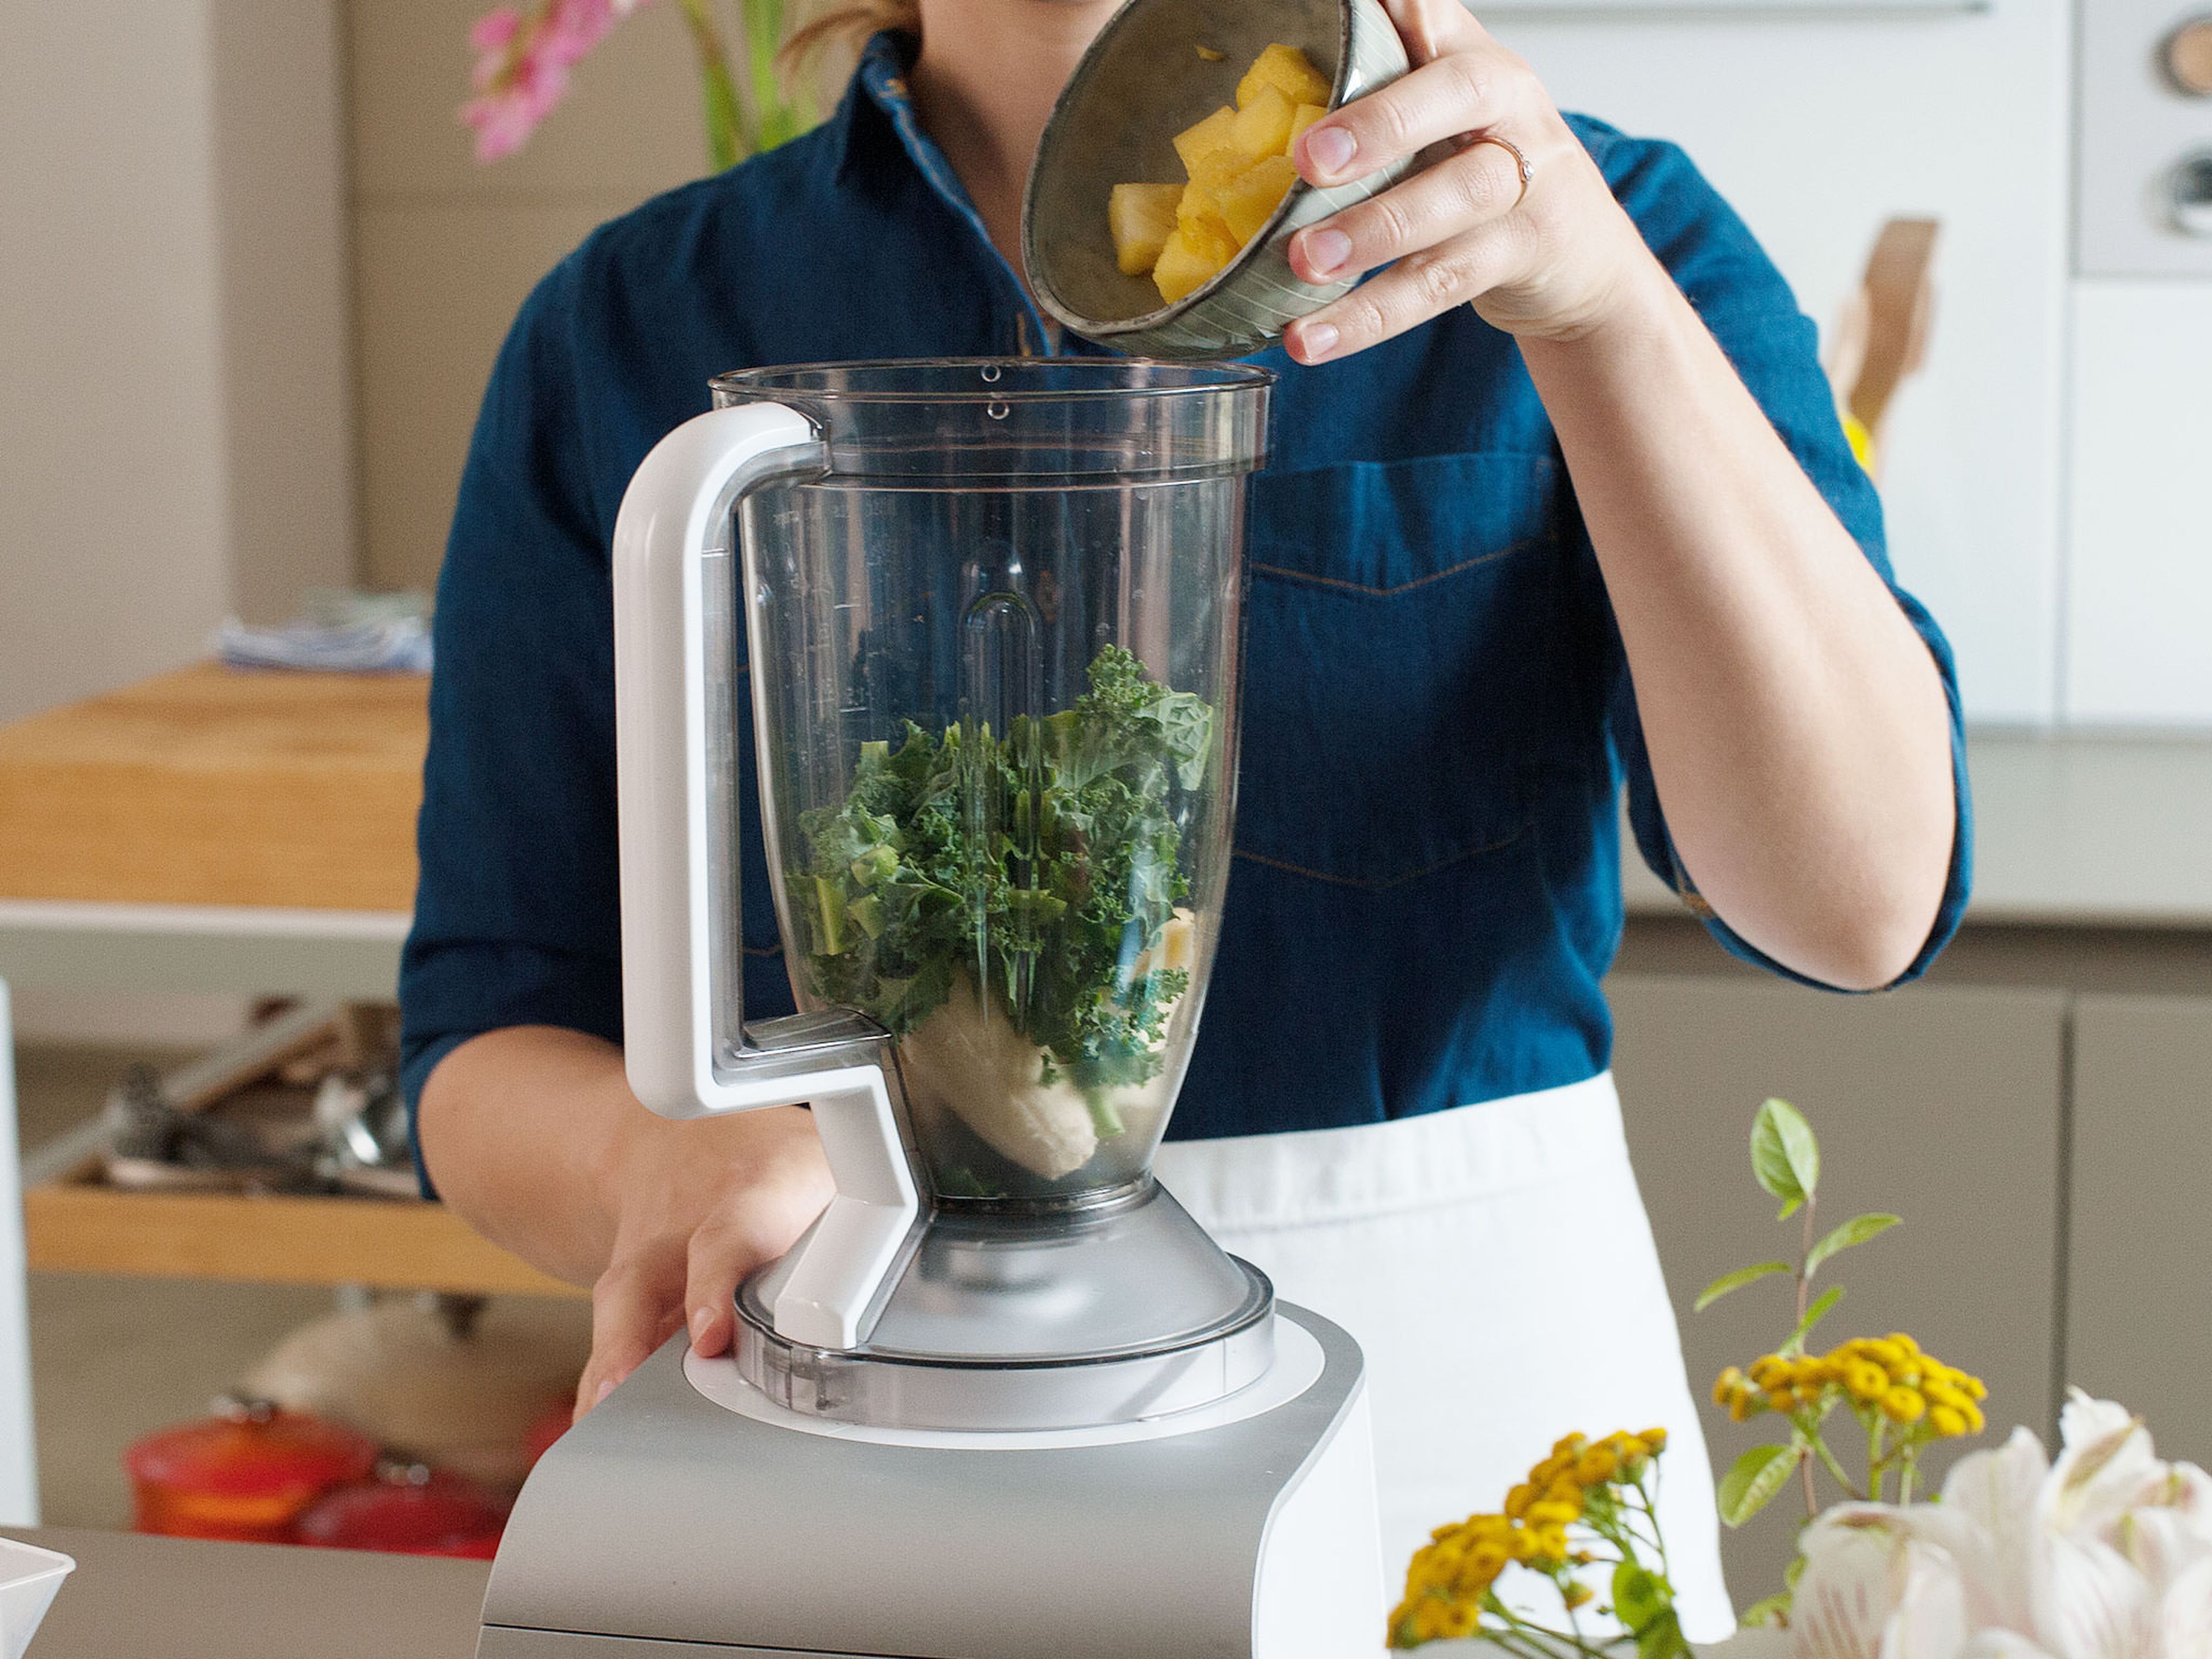 Combine all ingredients in a blender.